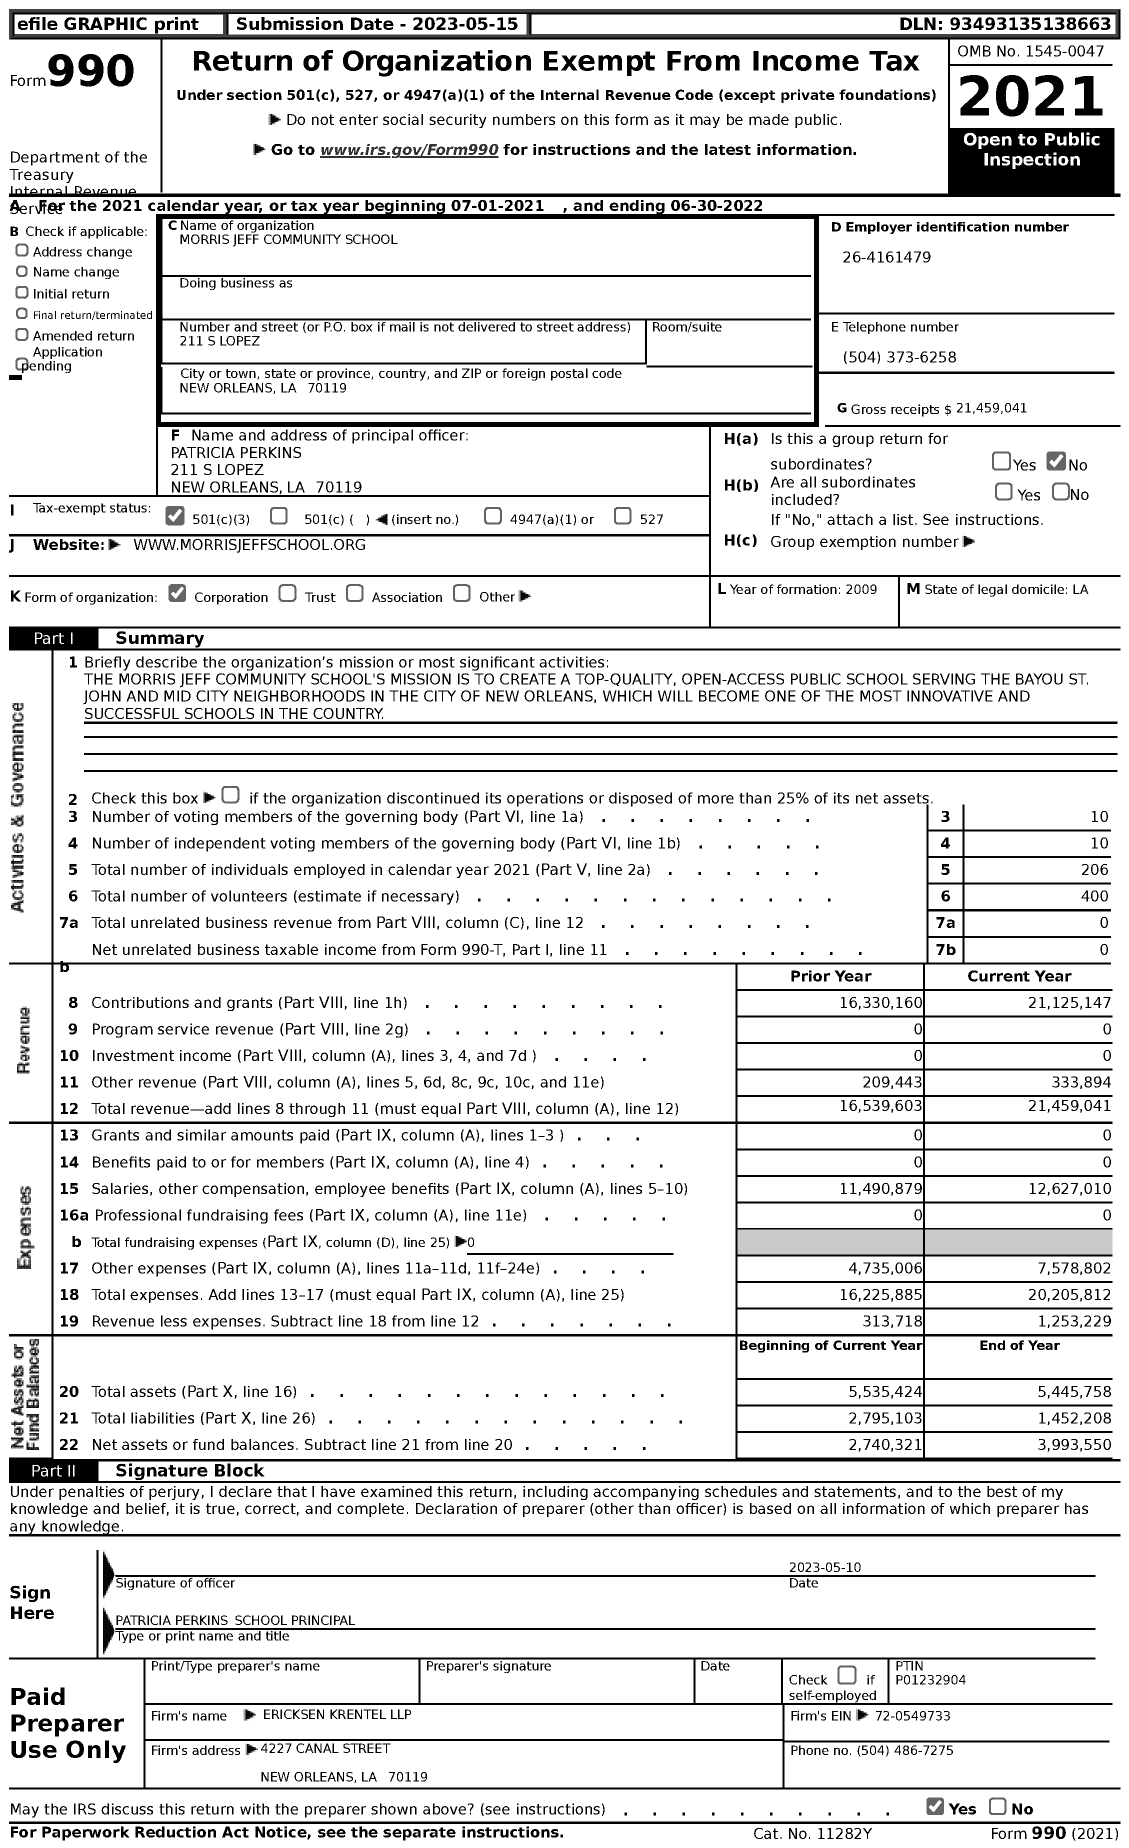 Image of first page of 2021 Form 990 for Morris Jeff Community School